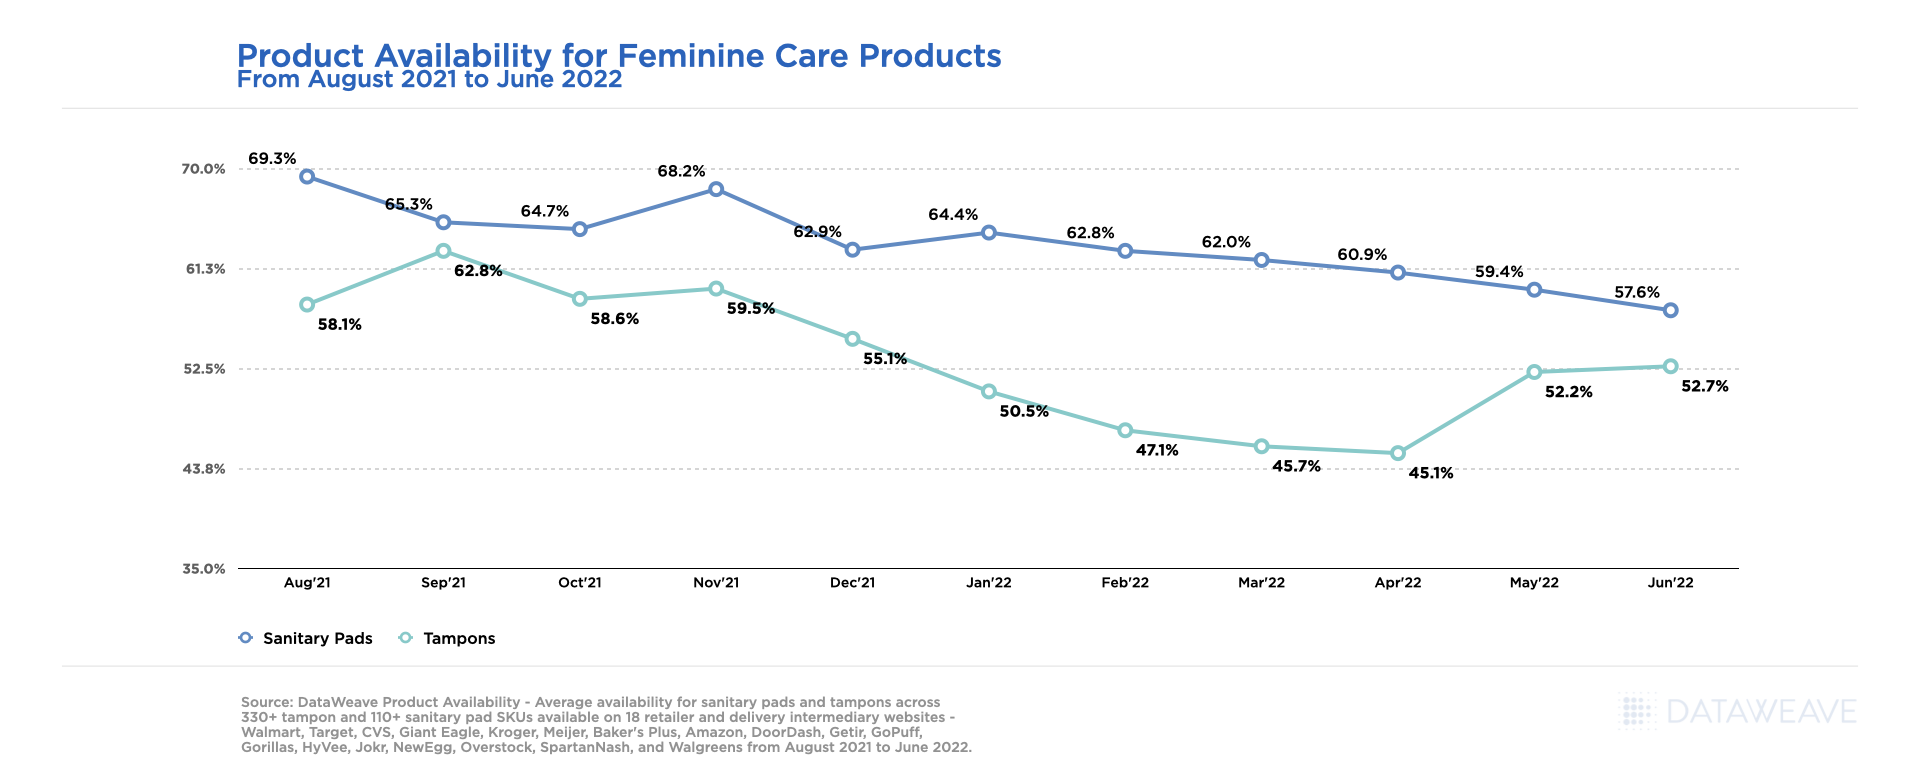 Product Availability for Feminine Care Products - June 2022